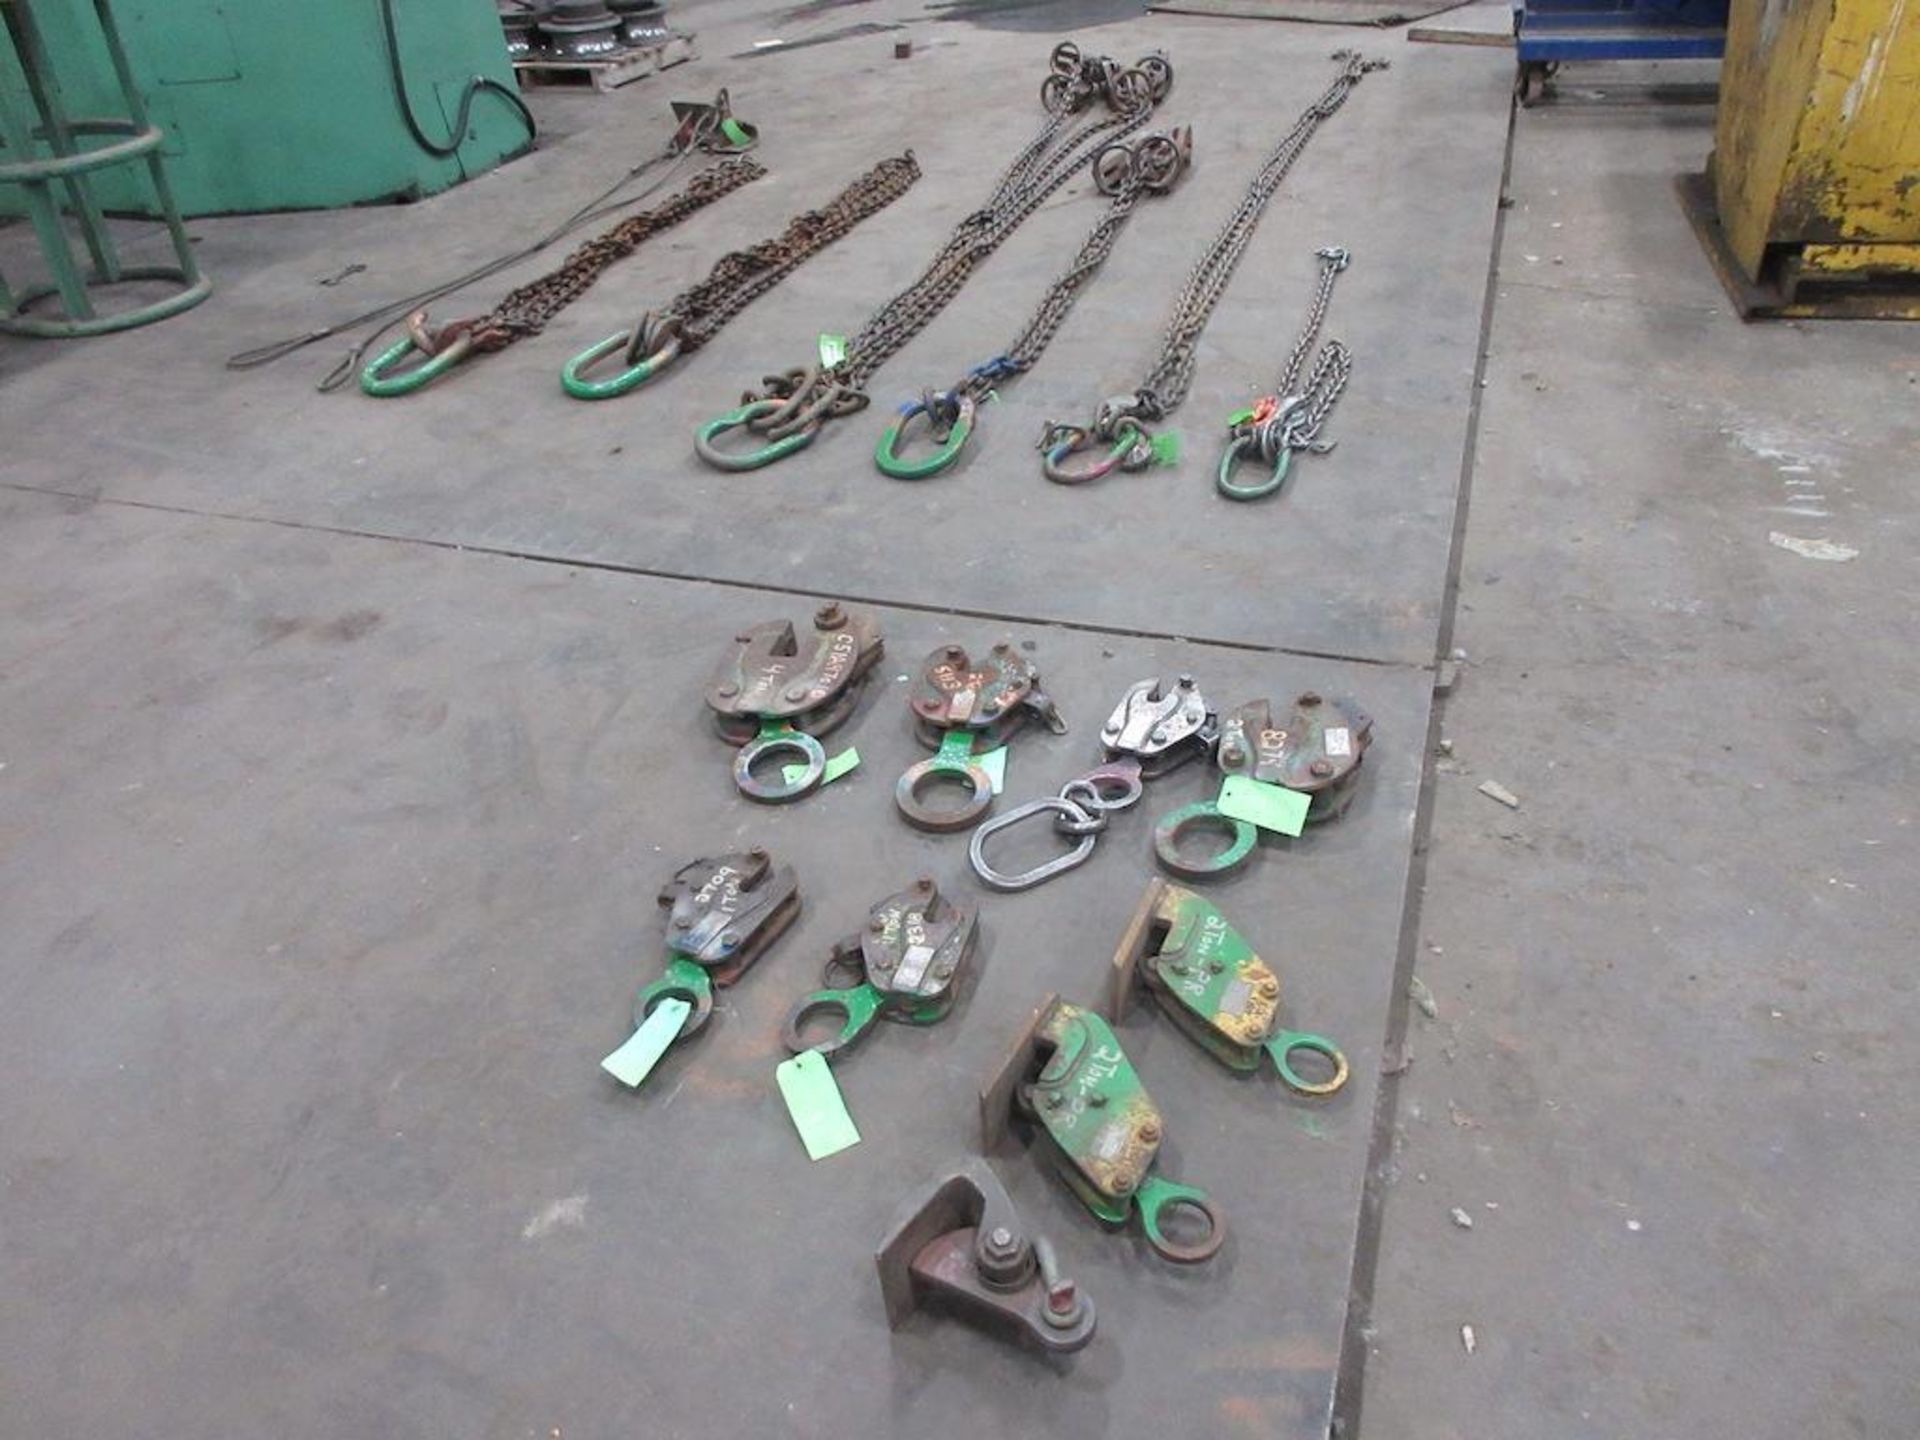 (6) ASSORTED HEAVY DUTY LIFTING CHAINS, UP TO 3 TON PLATE GRABS, PLUS (9) ASSORTED PLATE GRABS UP TO